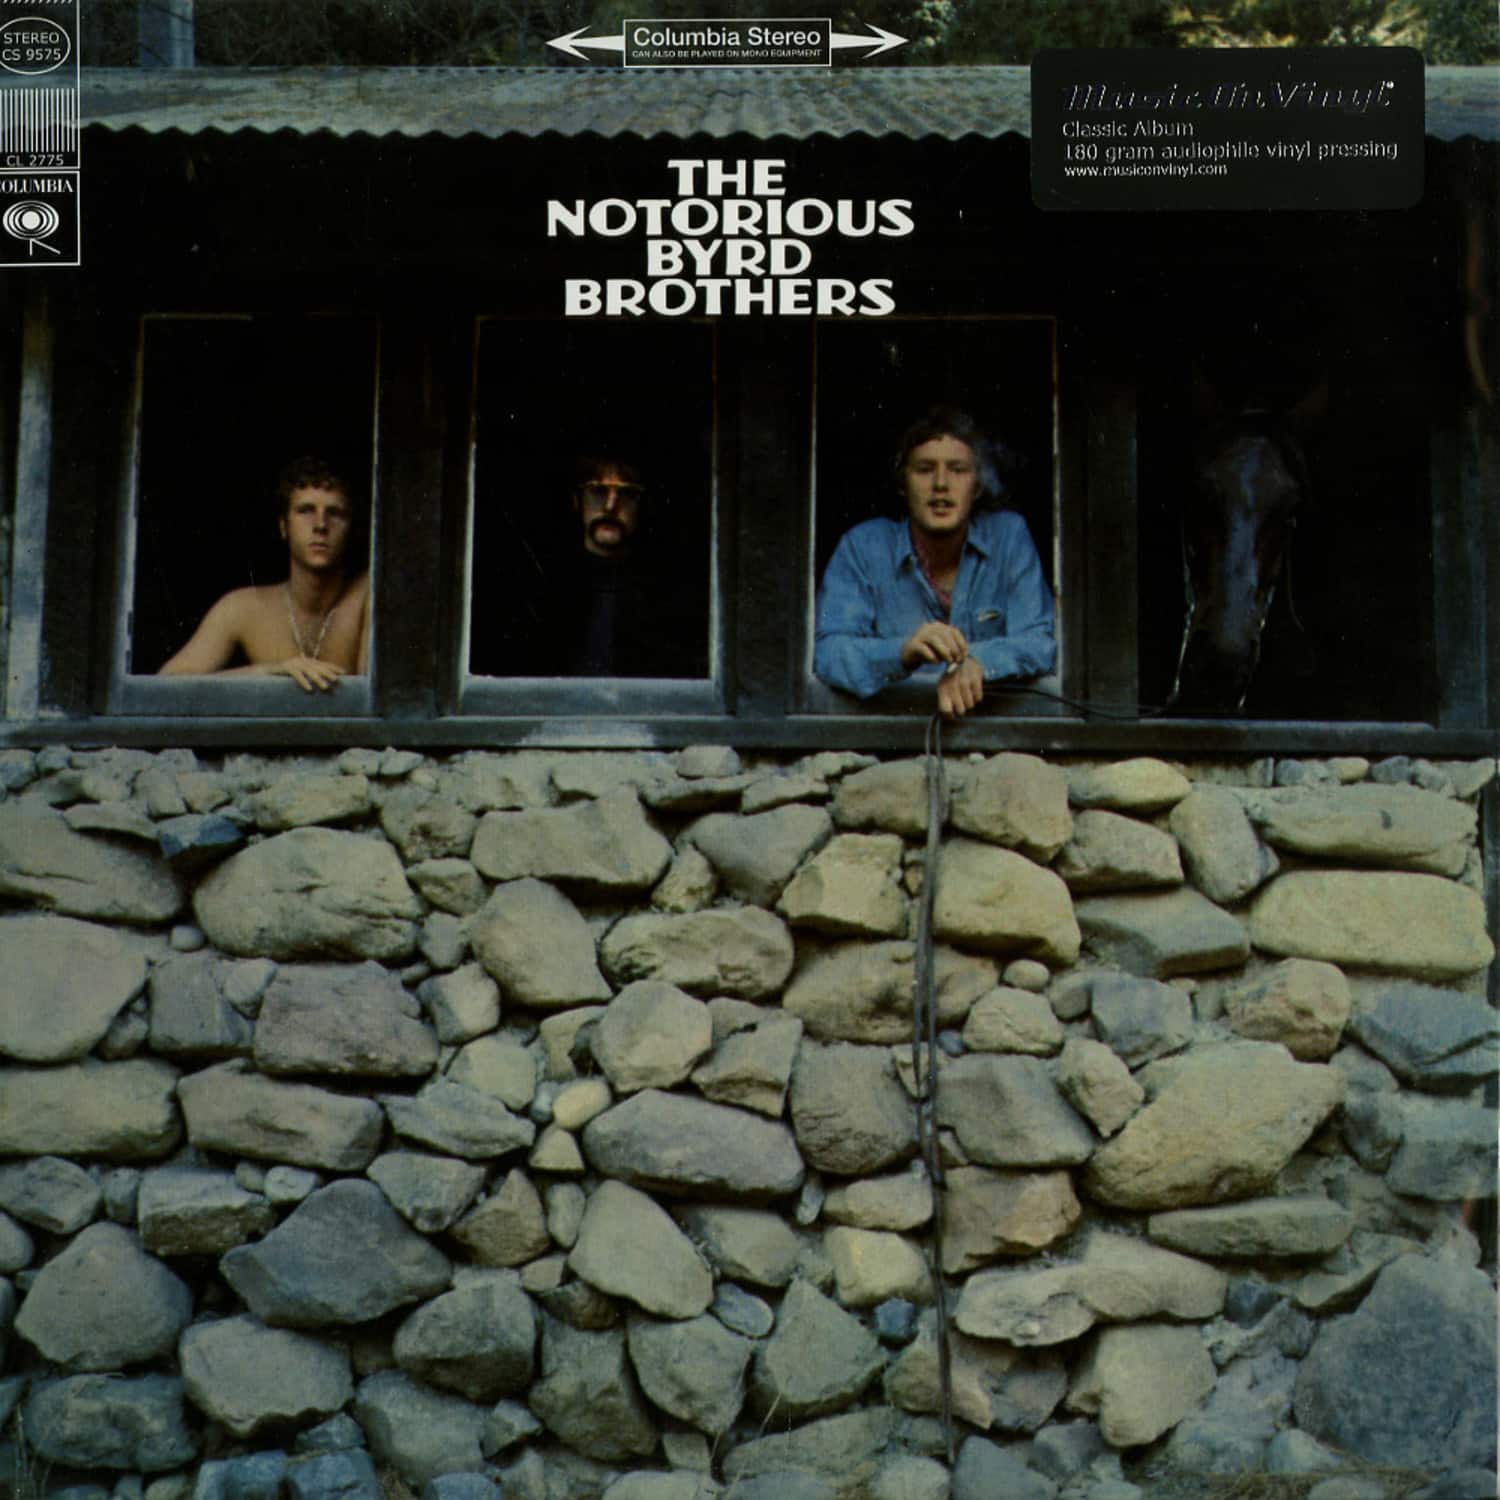 Byrds - THE NOTORIOUS BYRD BROTHERS 